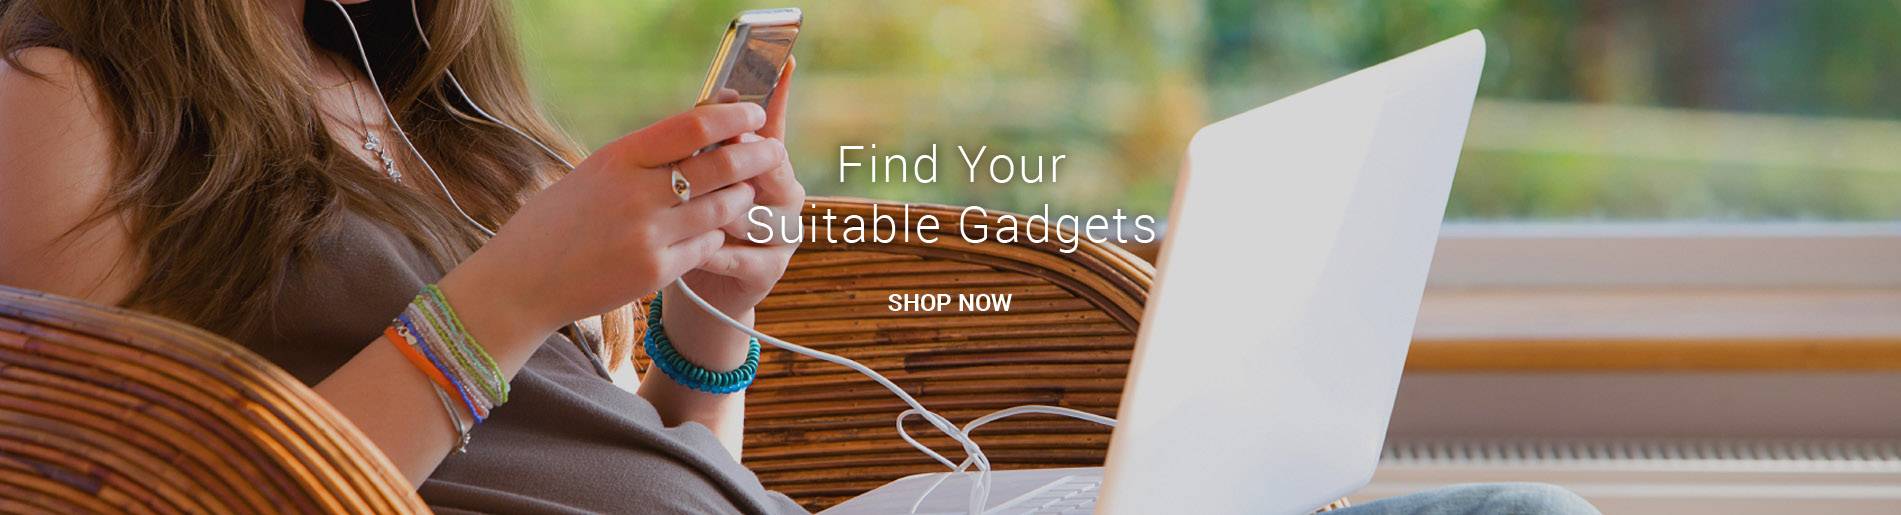 Find Your Suitable Gadgets